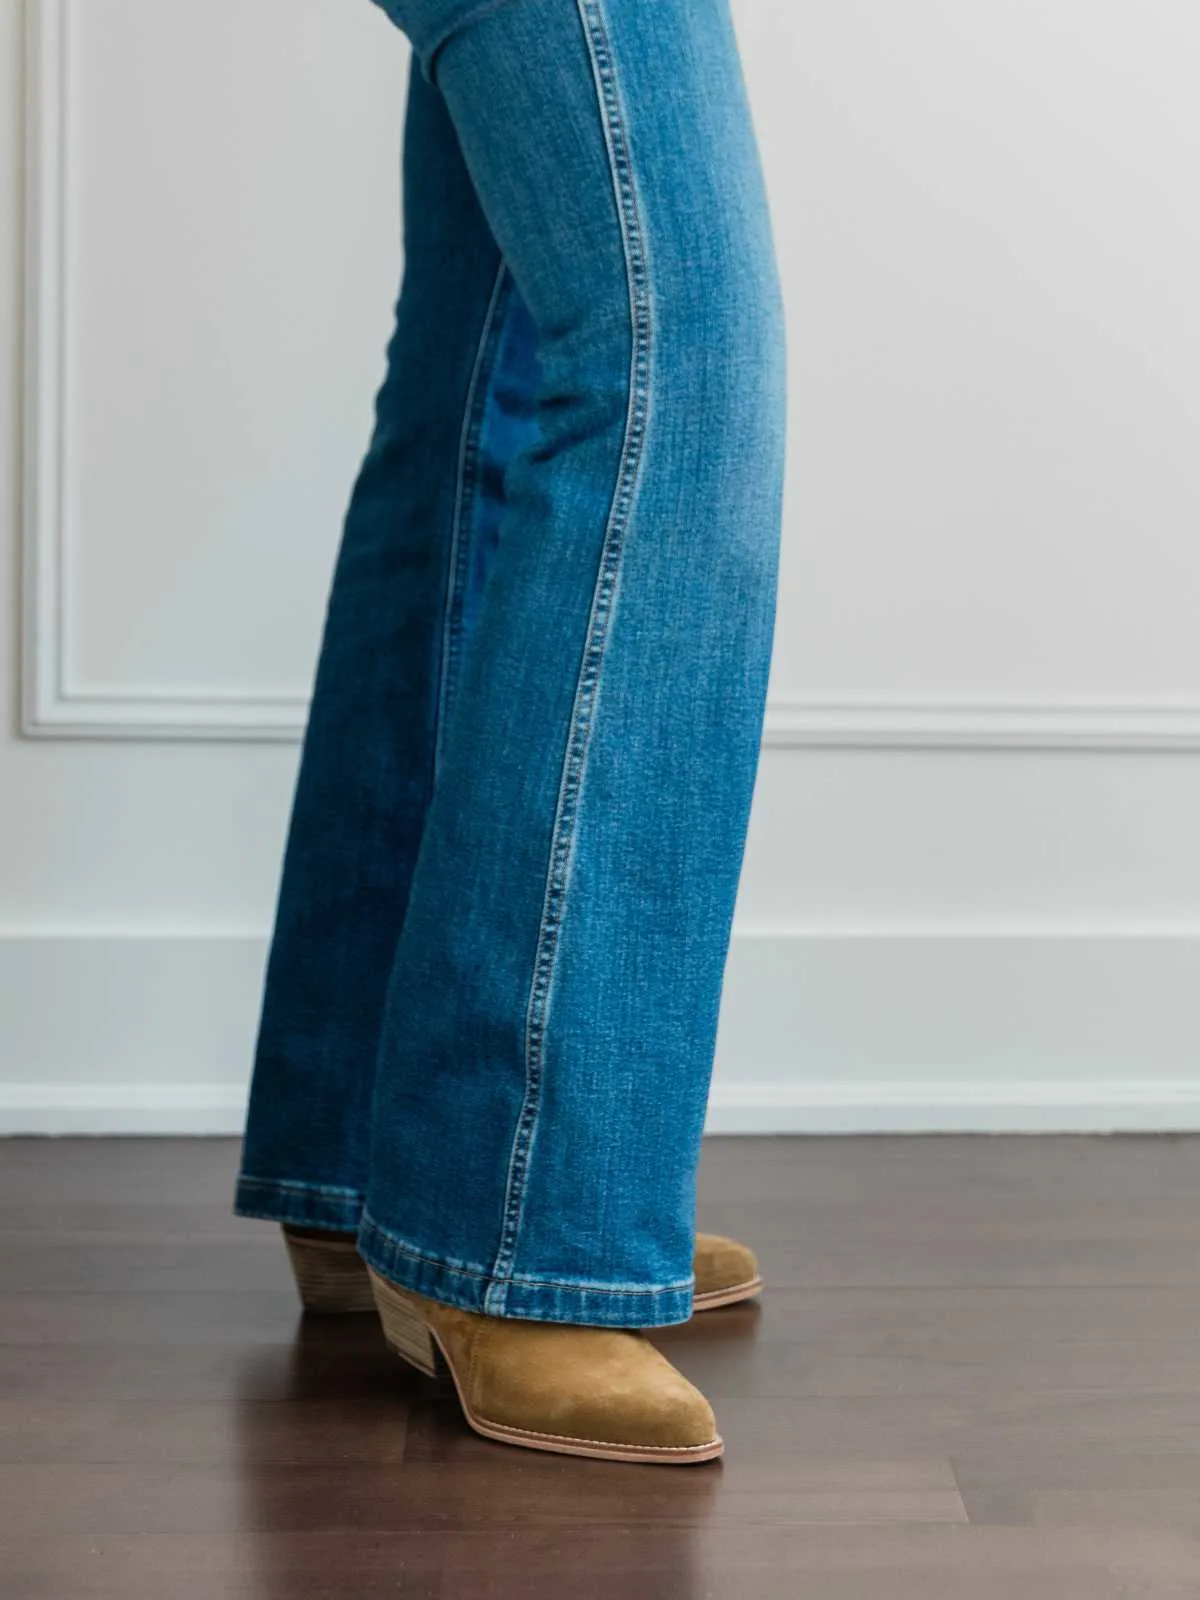 Cropped view of woman's legs wearing  western ankle boots with full length blue flare jeans.